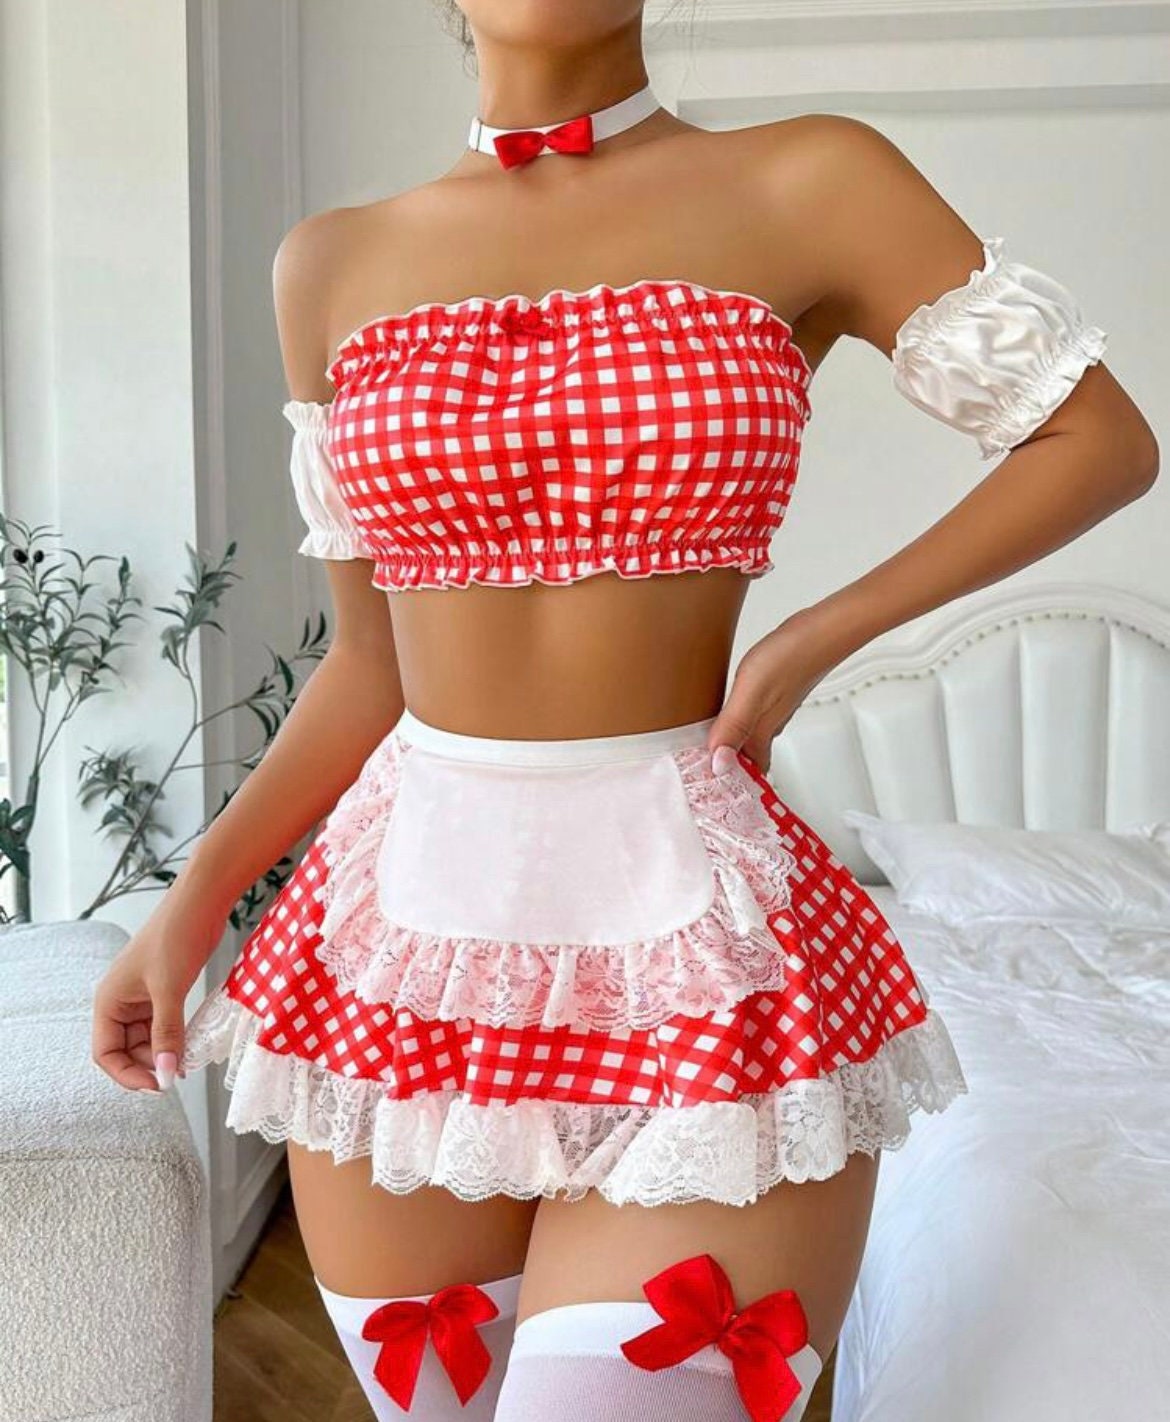 Red Maid Uniform Porn - Red Sexy French Maid - Etsy